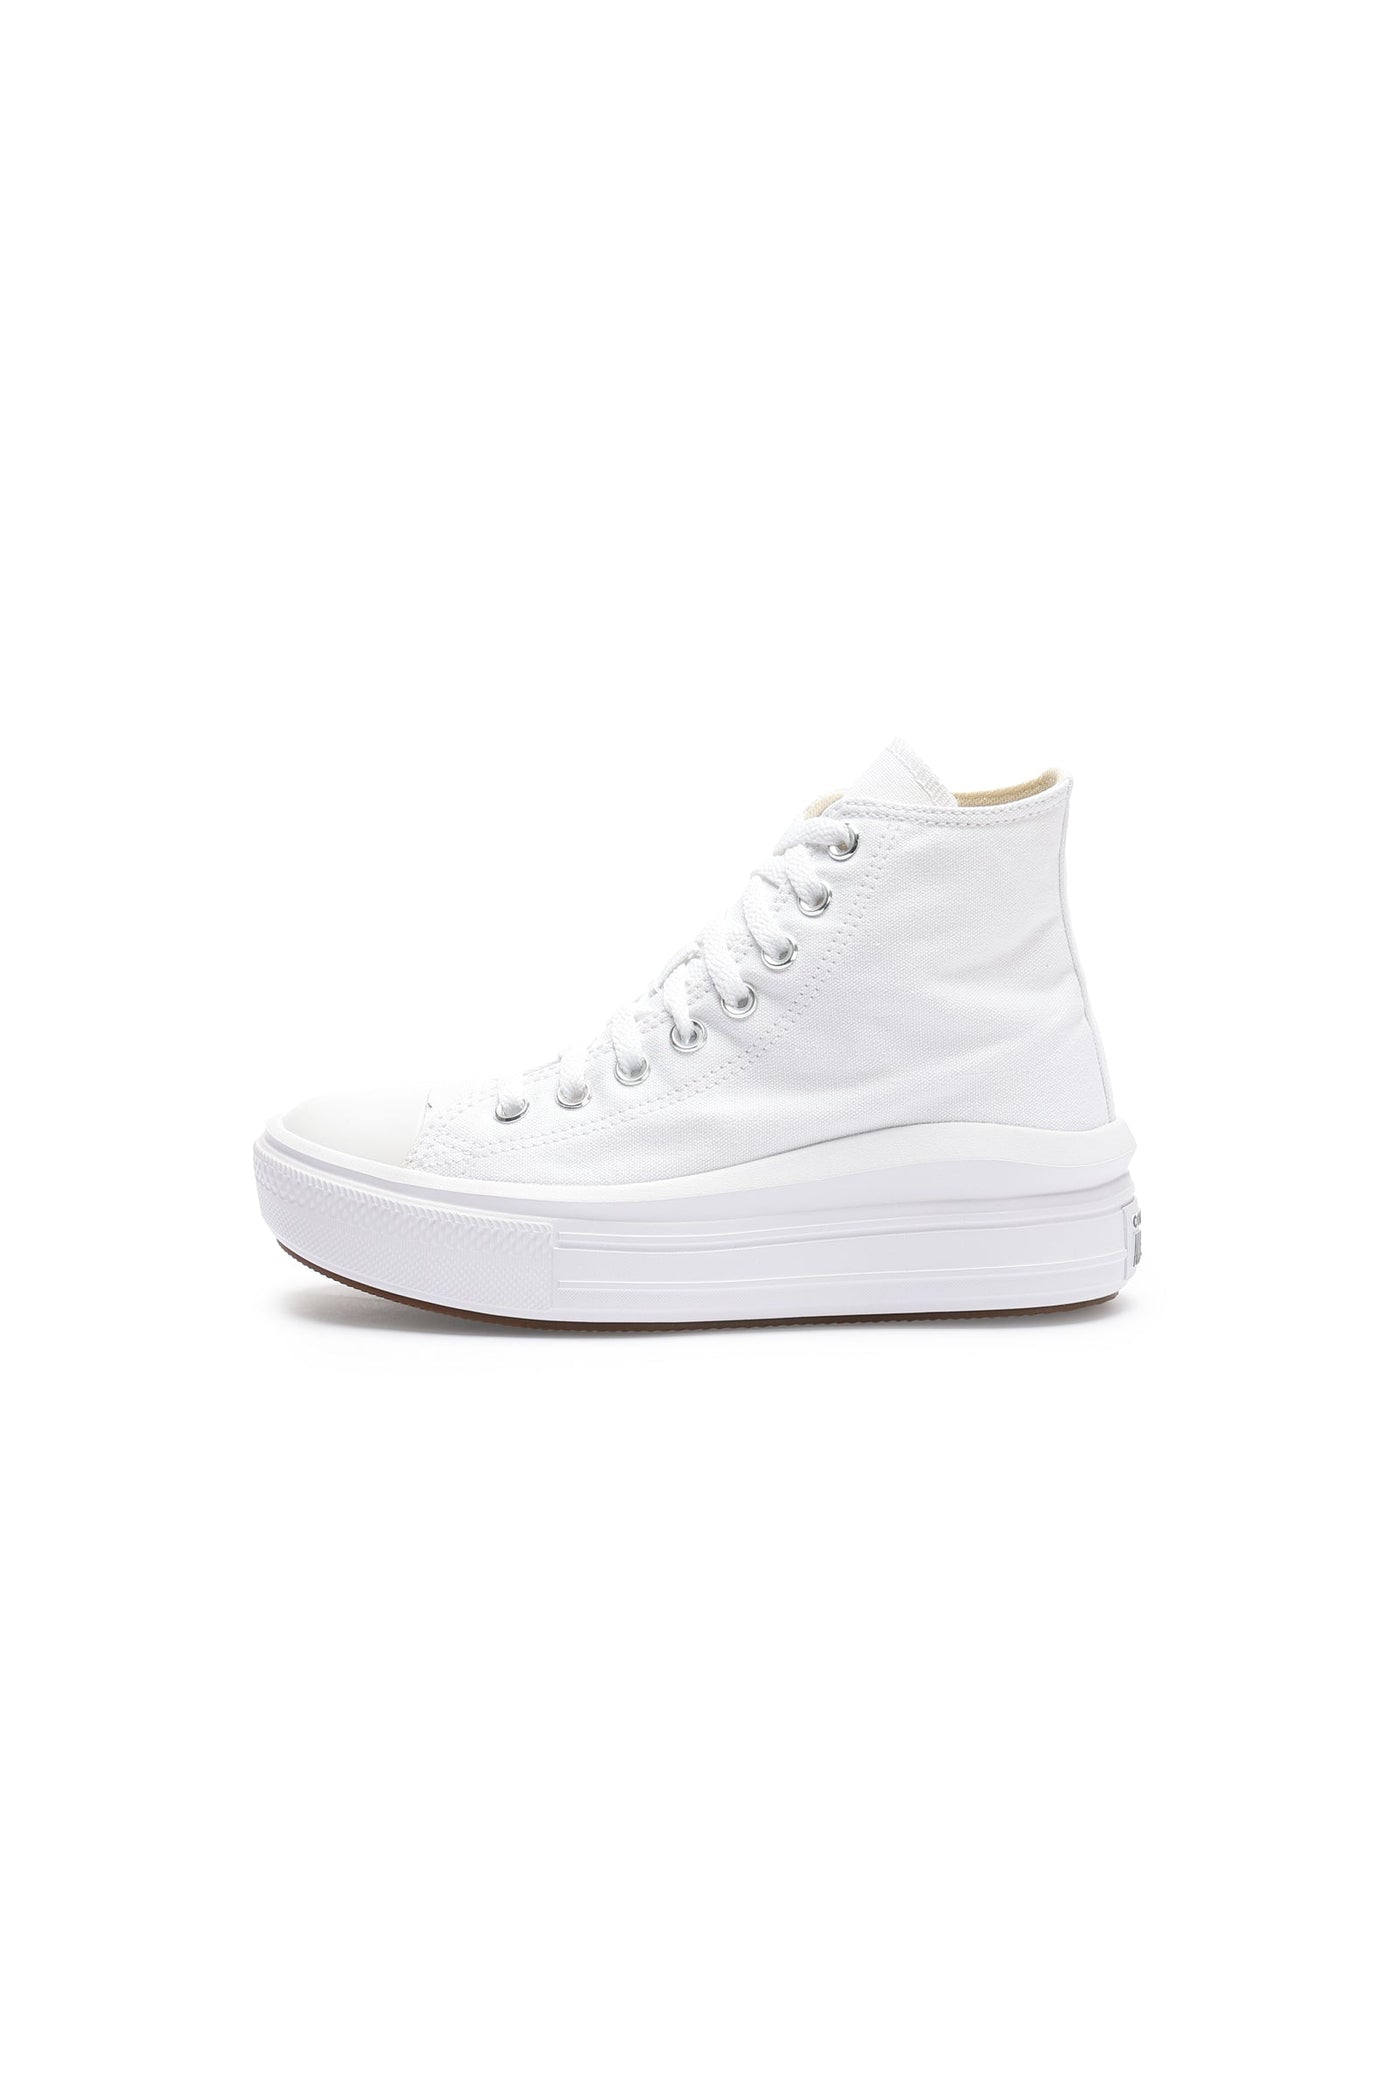 CT AS MOVE CANVAS COLOR Optical White / 39 / Women